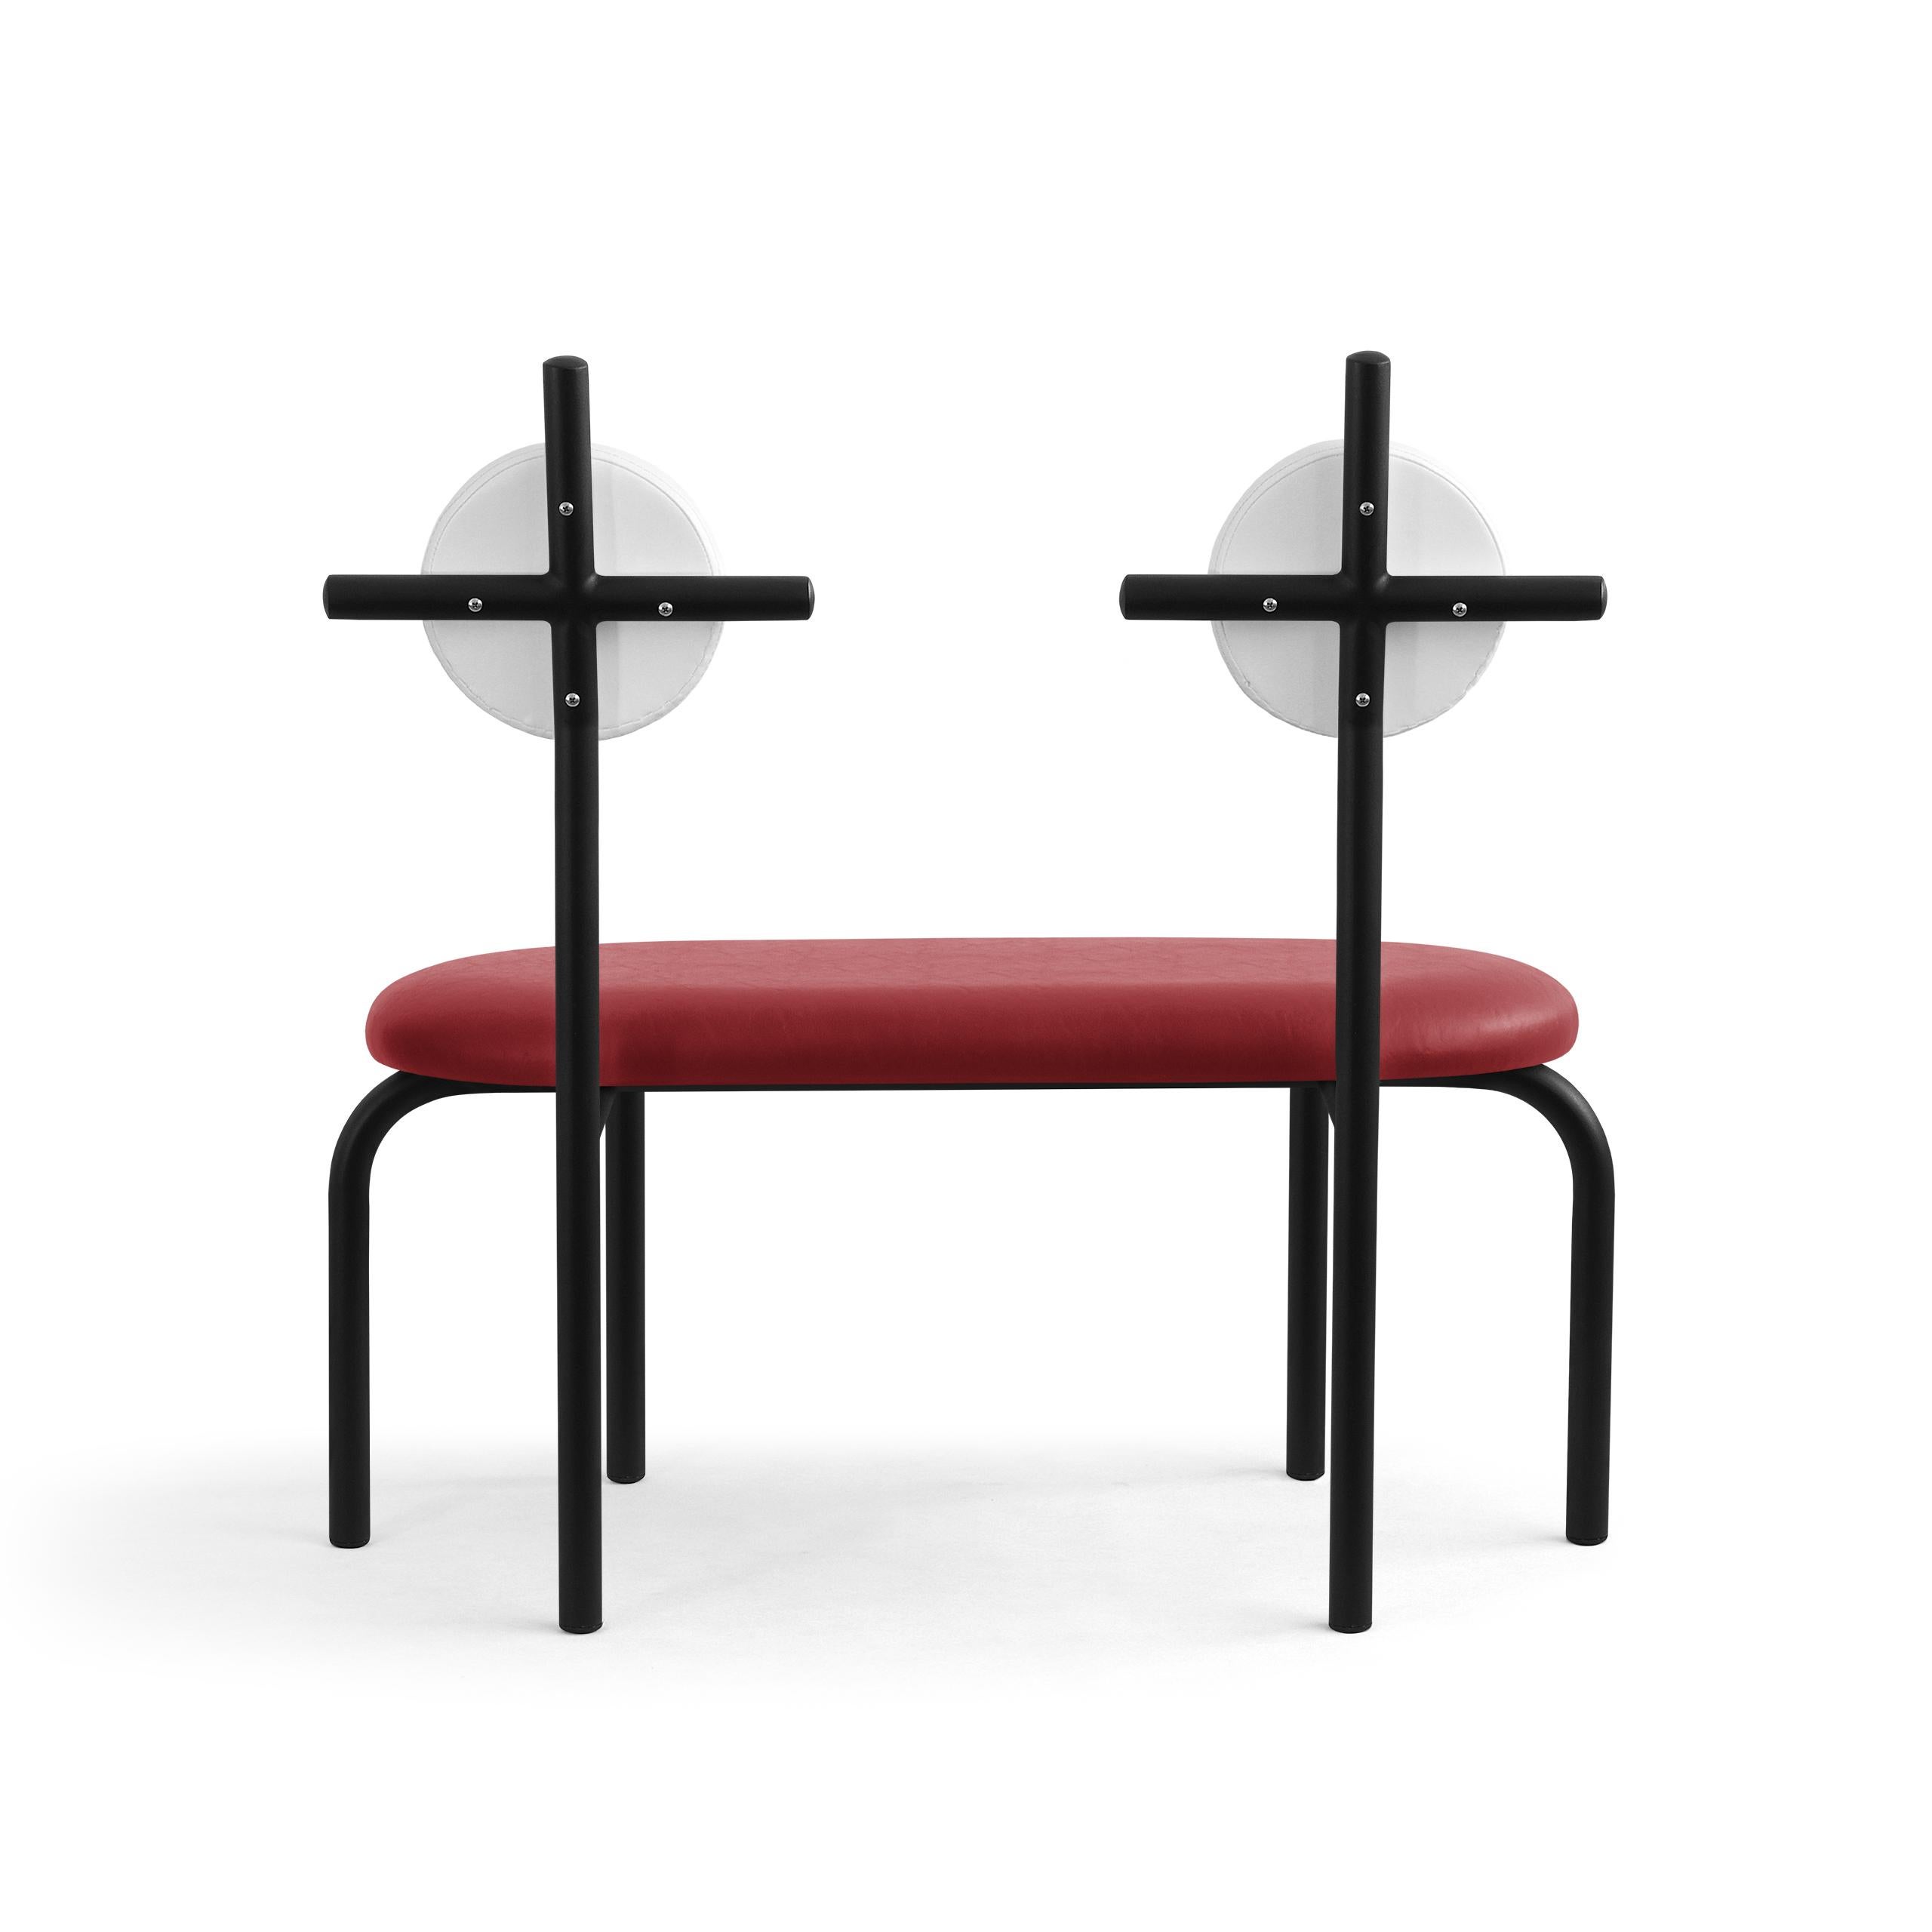 PK17 Impermeable Loveseat, Red Seat & Black Metal Structure by Paulo Kobylka In New Condition For Sale In Londrina, Paraná